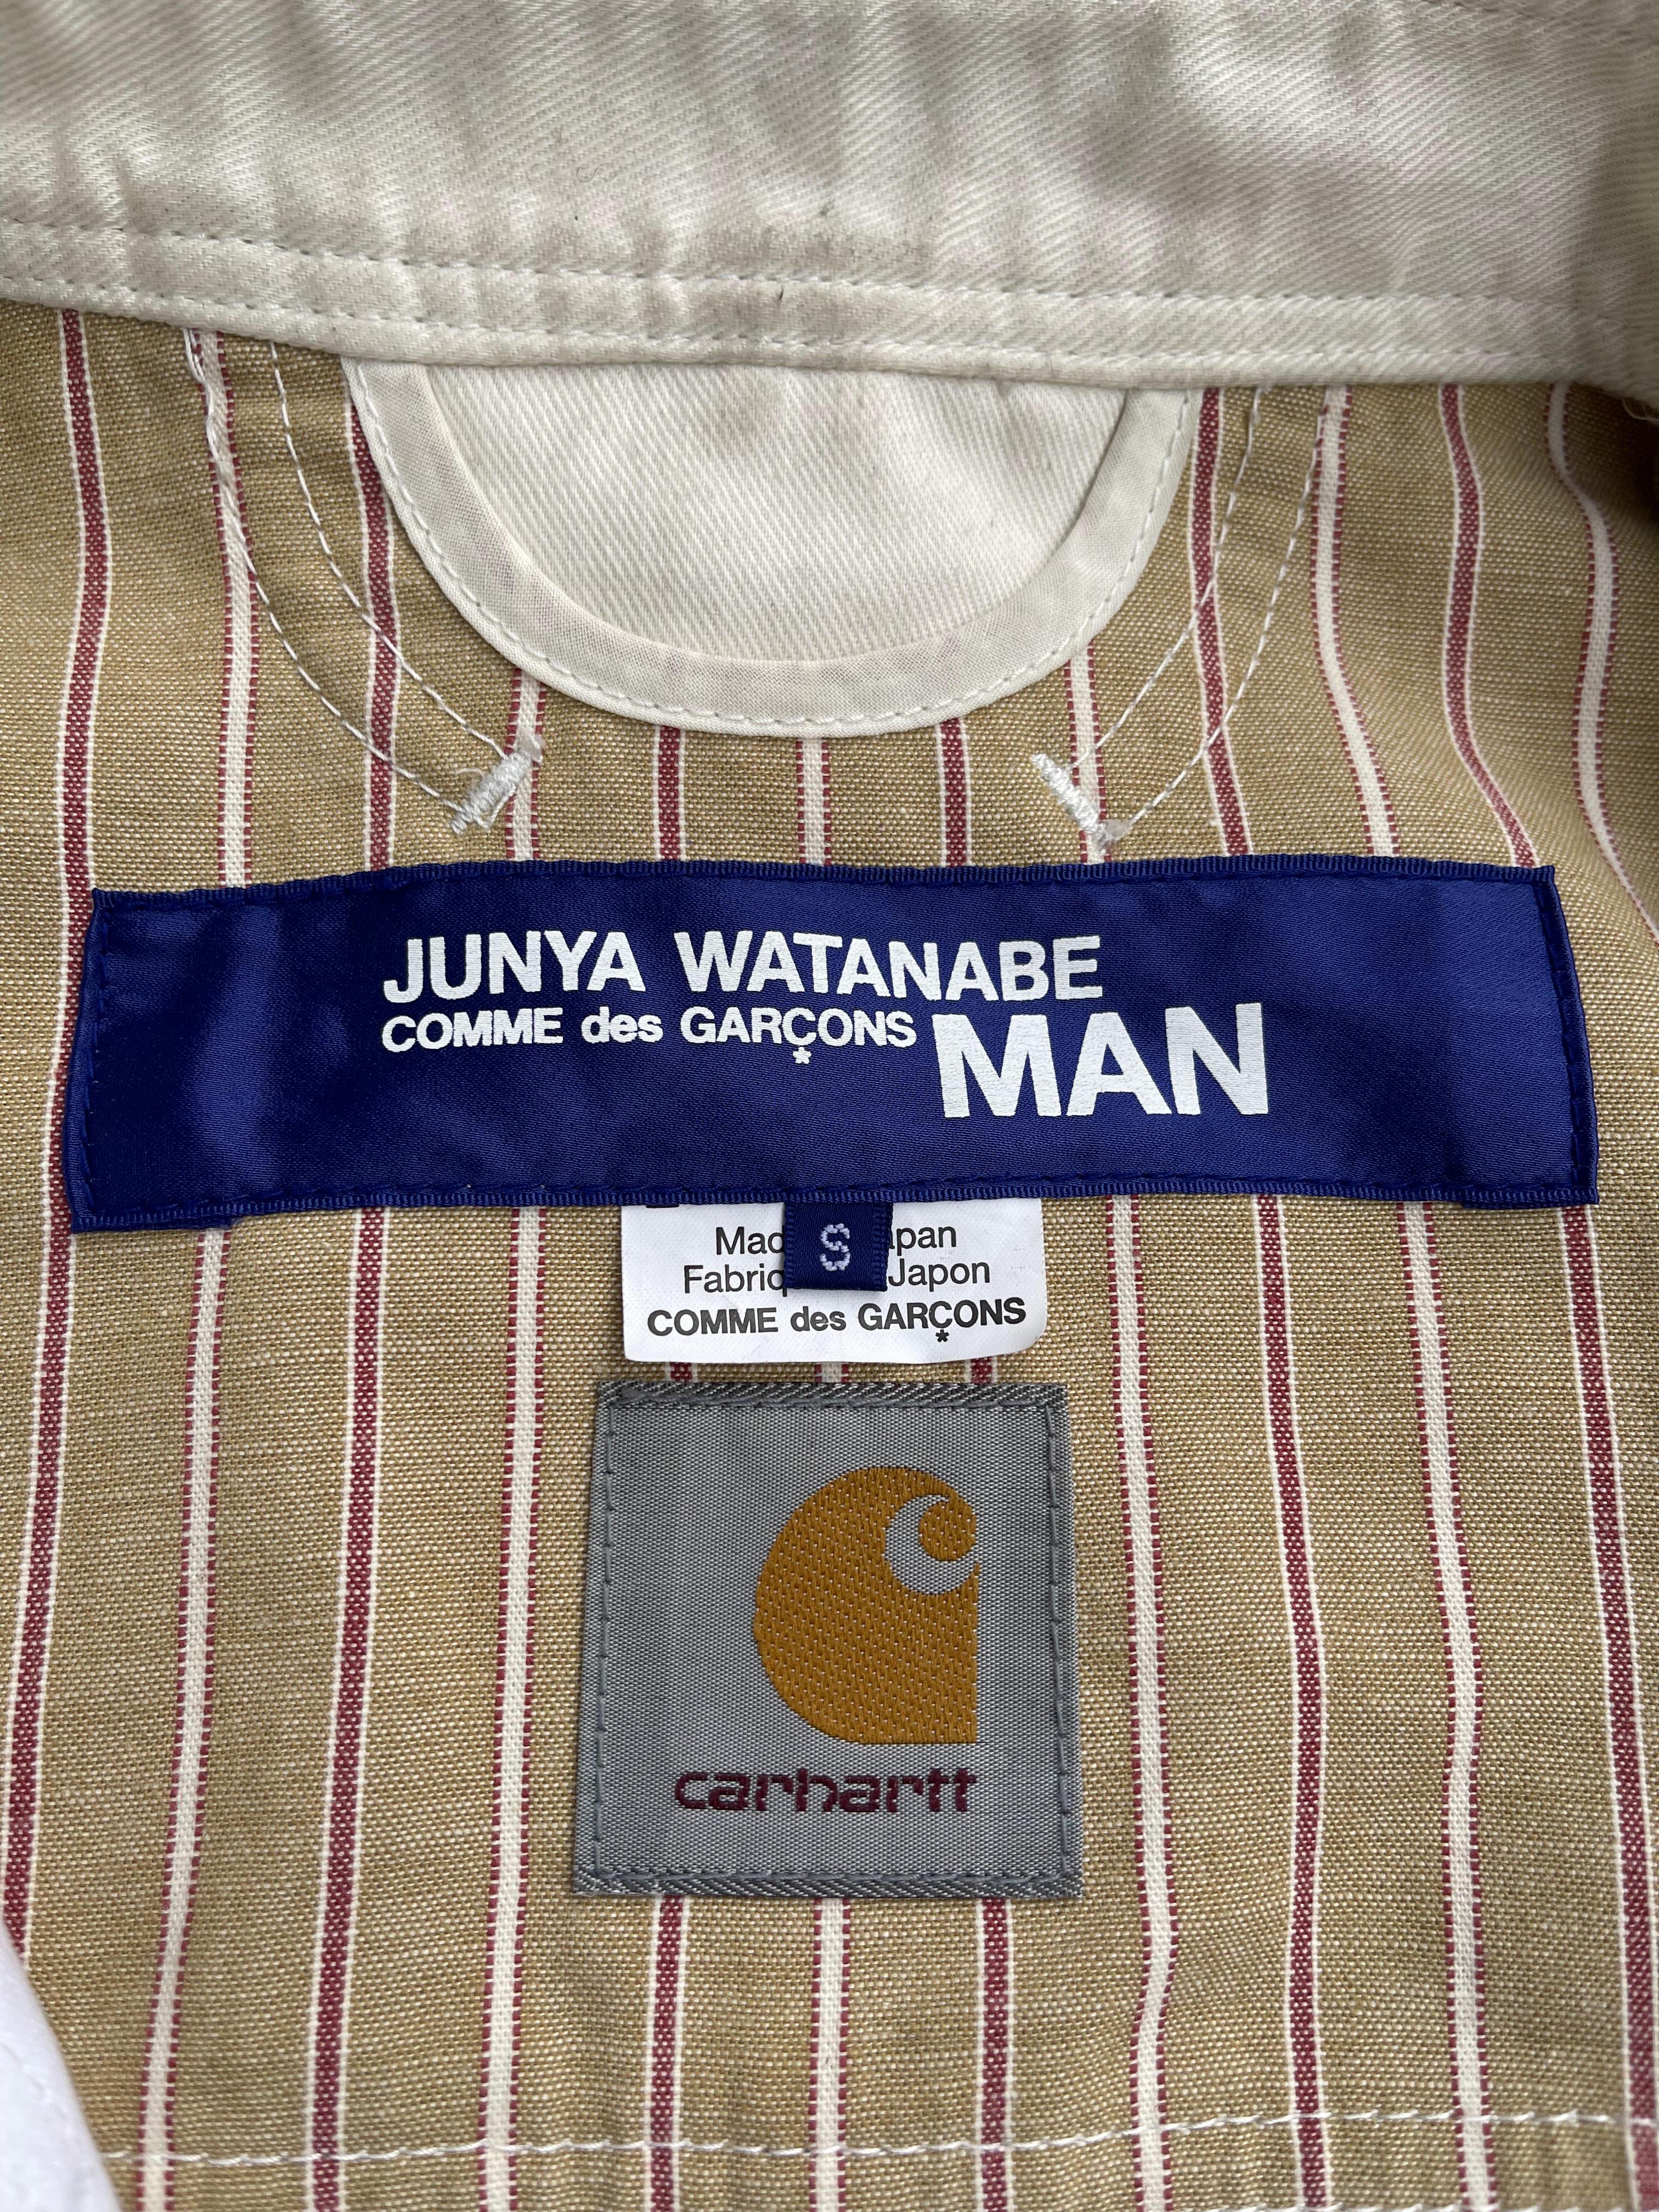 Comme Des Garcons x Junya Watanabe Carhartt Coverall Jacket, Spring Summer 2018 In Good Condition For Sale In Seattle, WA